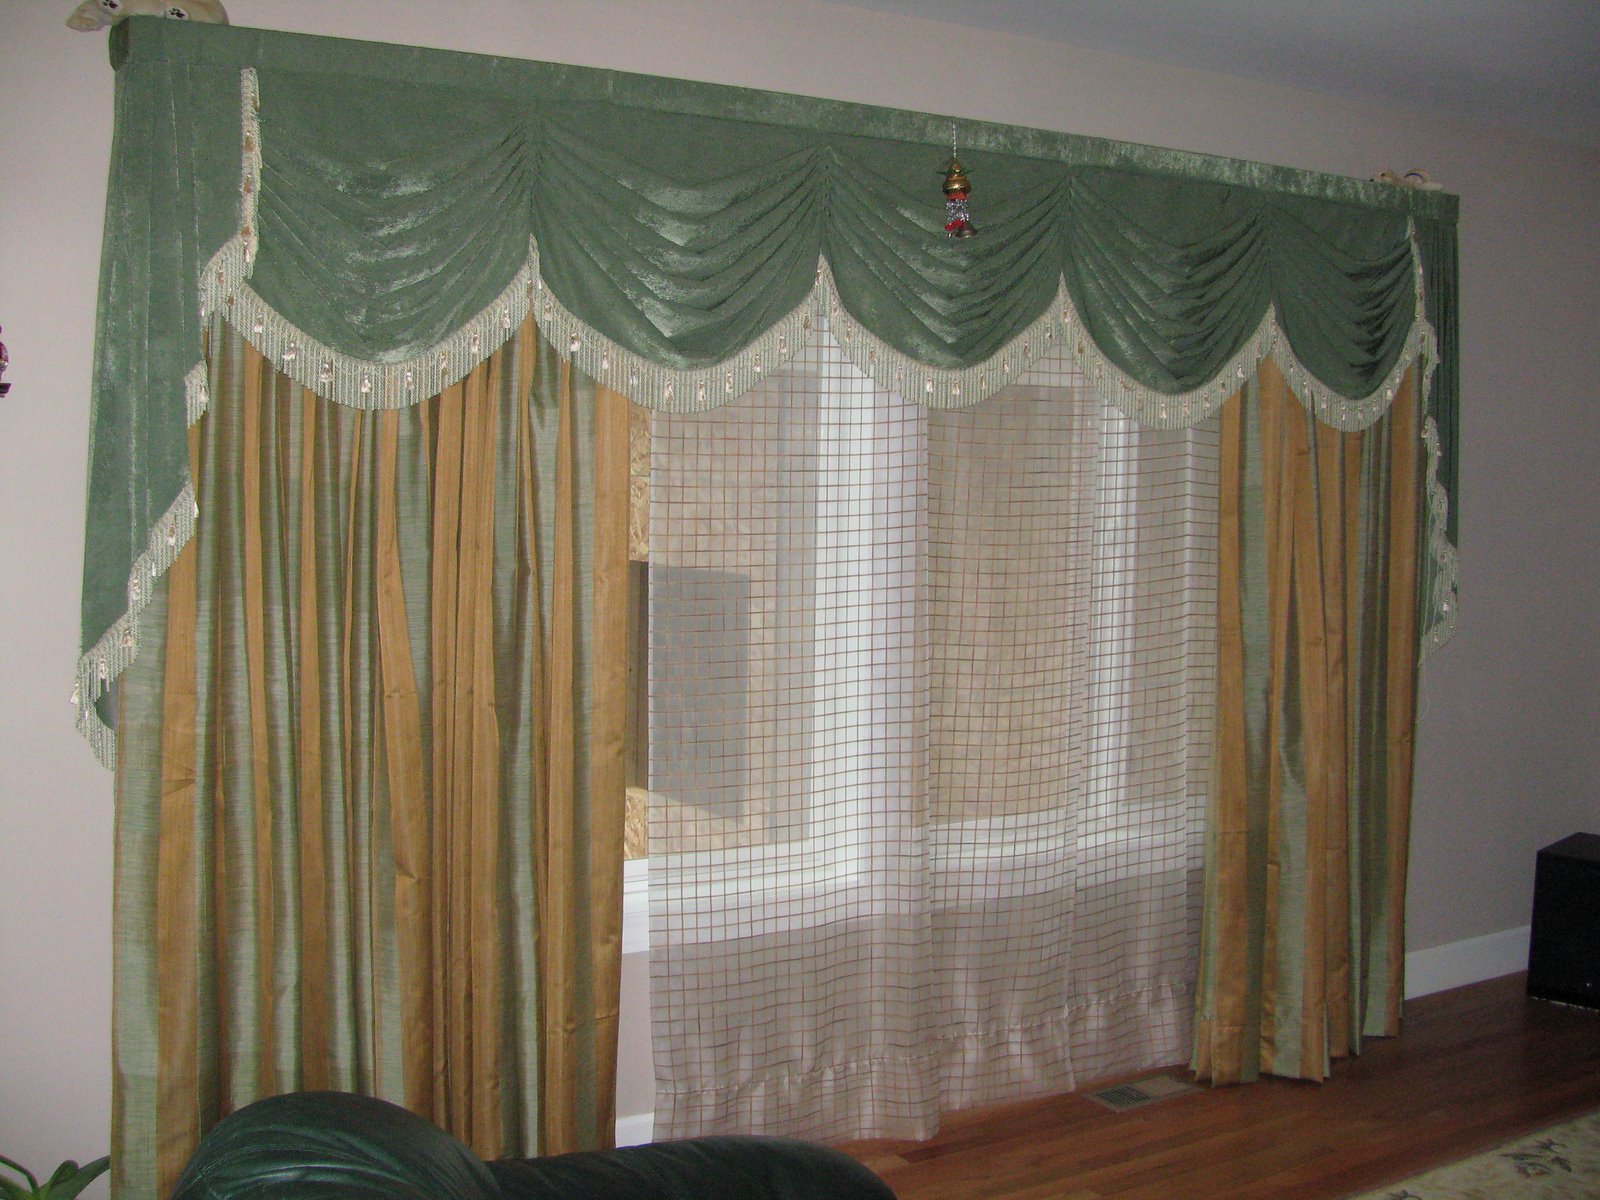 Latest Curtain Designs for Drawing Room